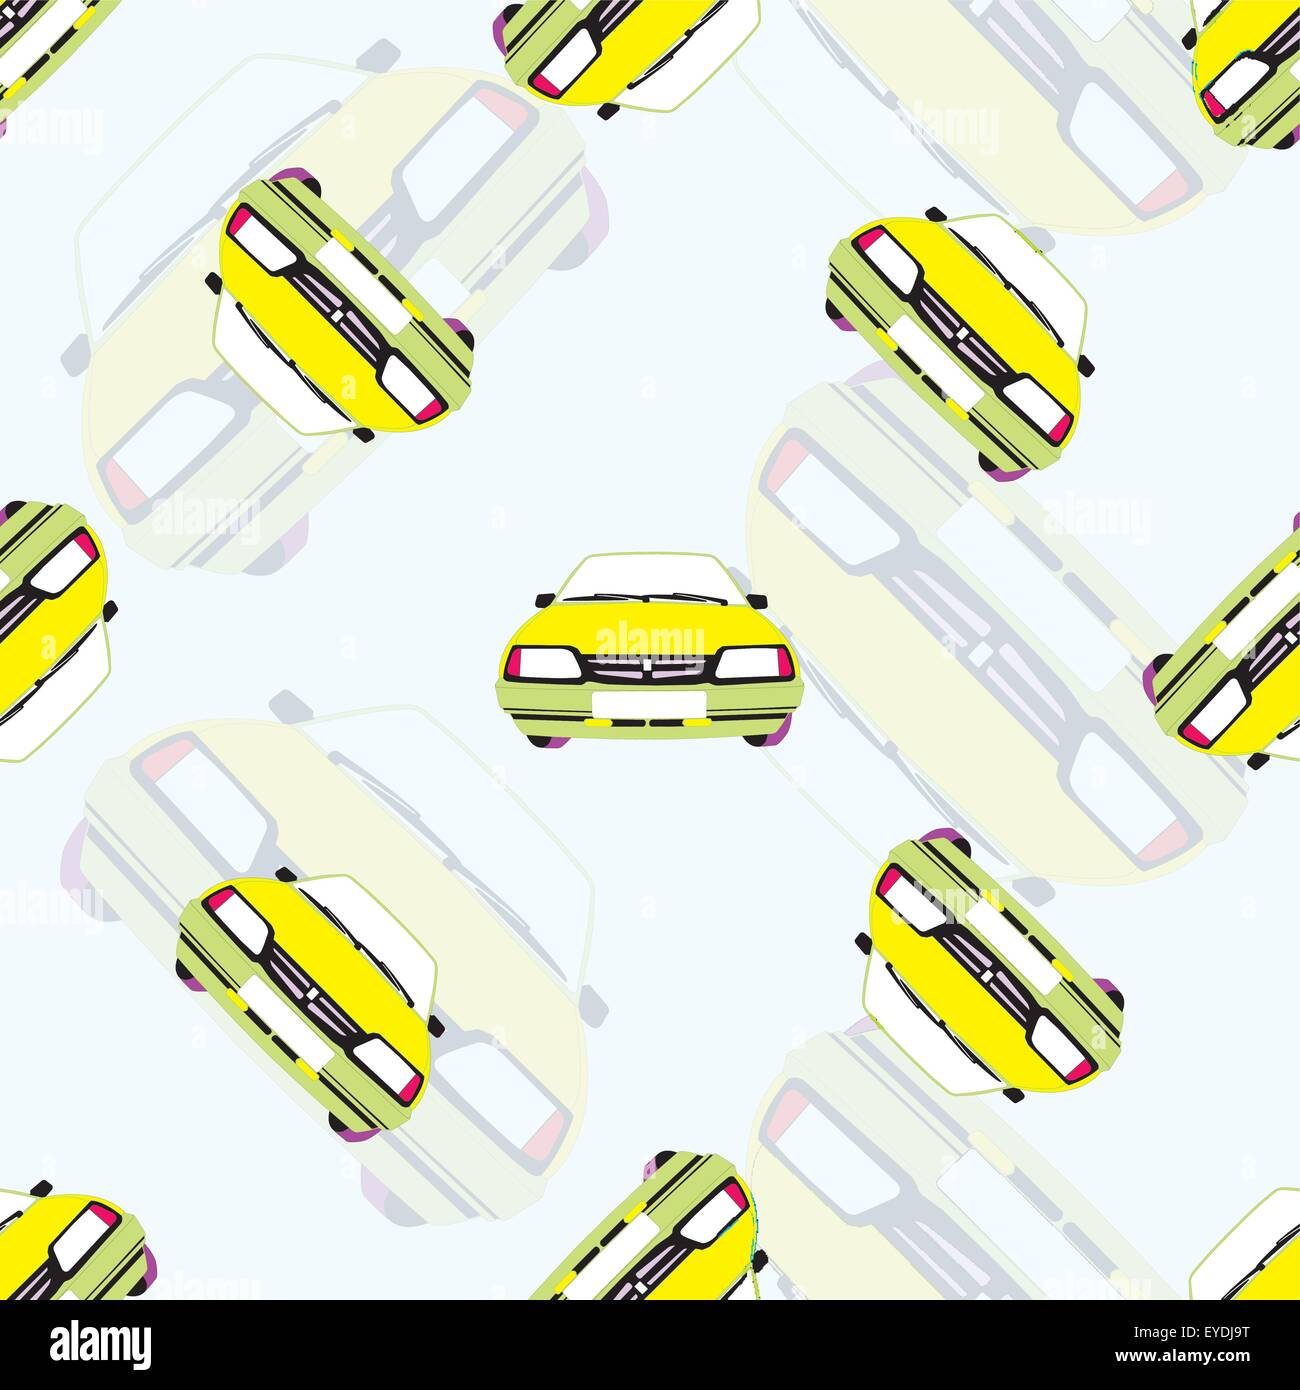 vector seamless background with kids toy cars Stock Vector